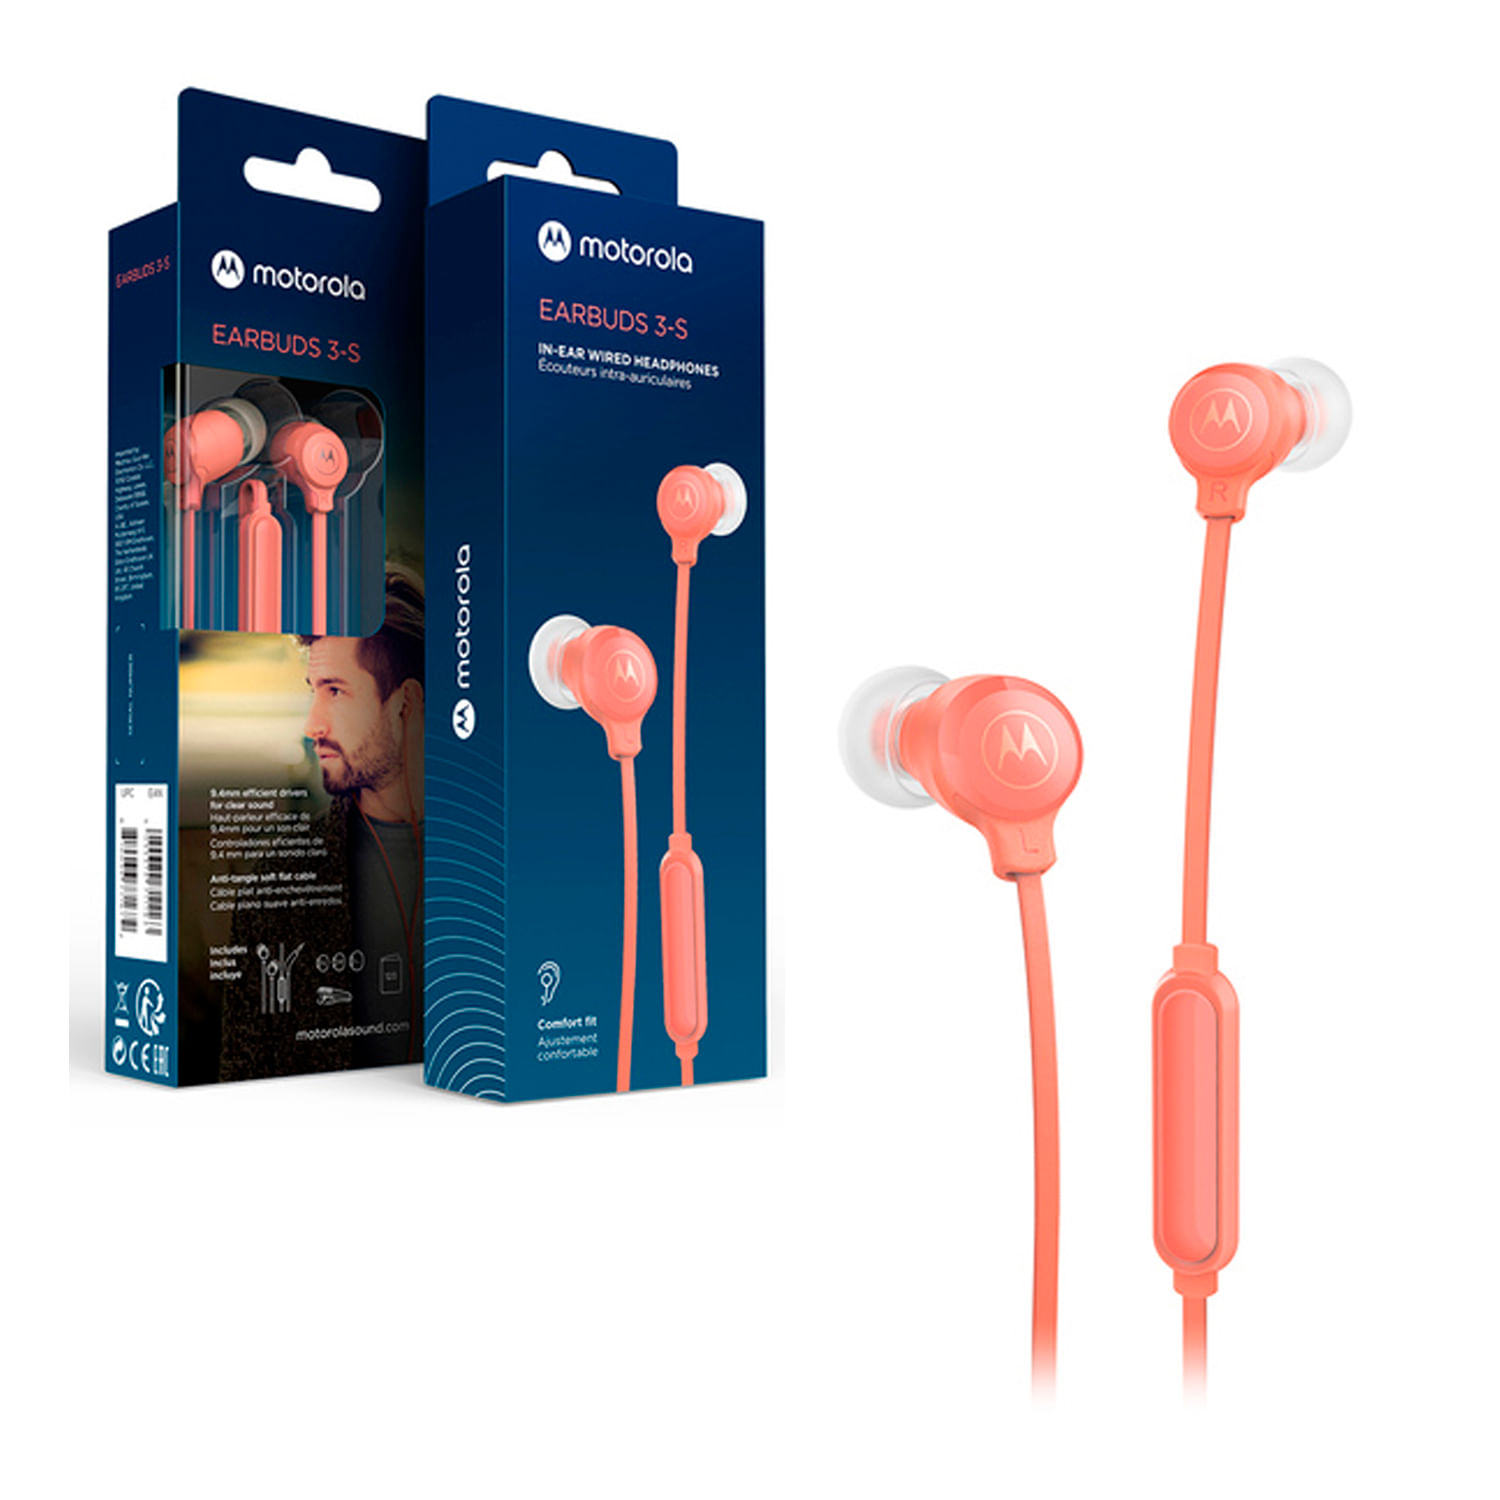 Audifonos Motorola IN EAR Wired Earbuds 3-S - Durazno